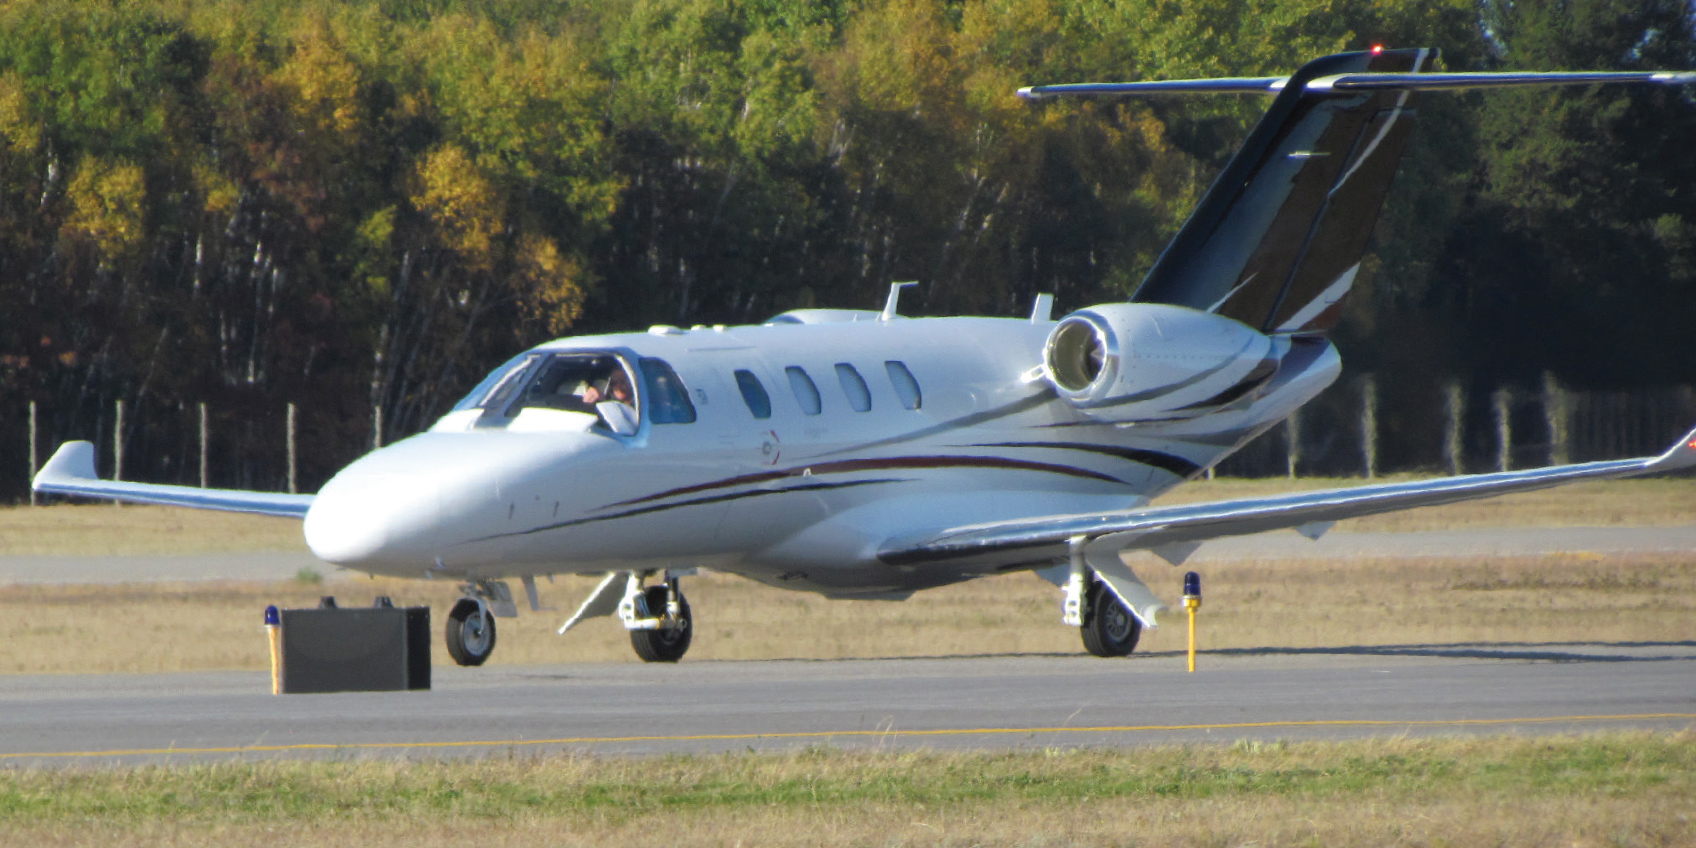 Citation M2 taxiing